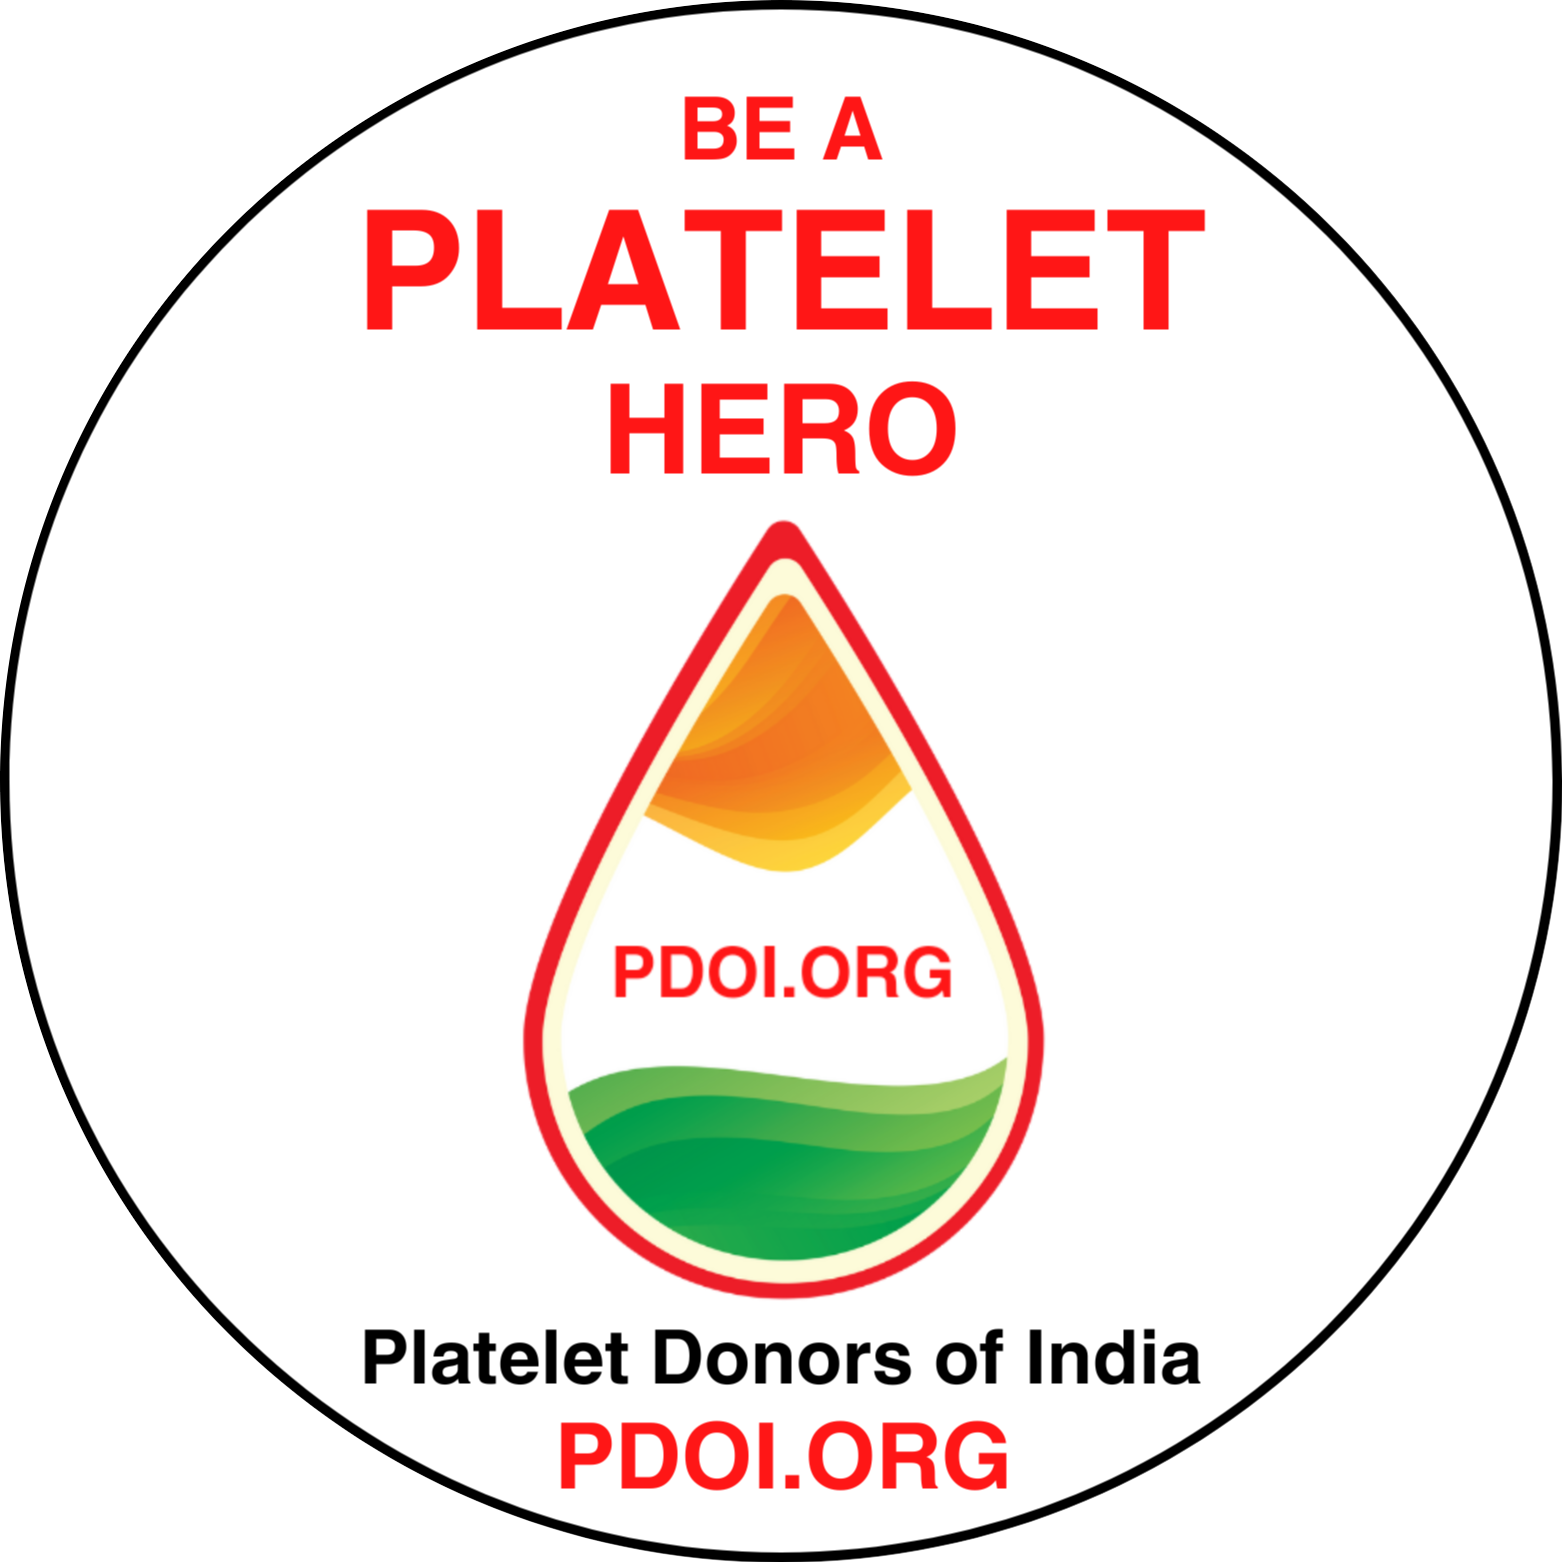 PDOI - Platelet Donors of India / BDOI - Blood Donors of India